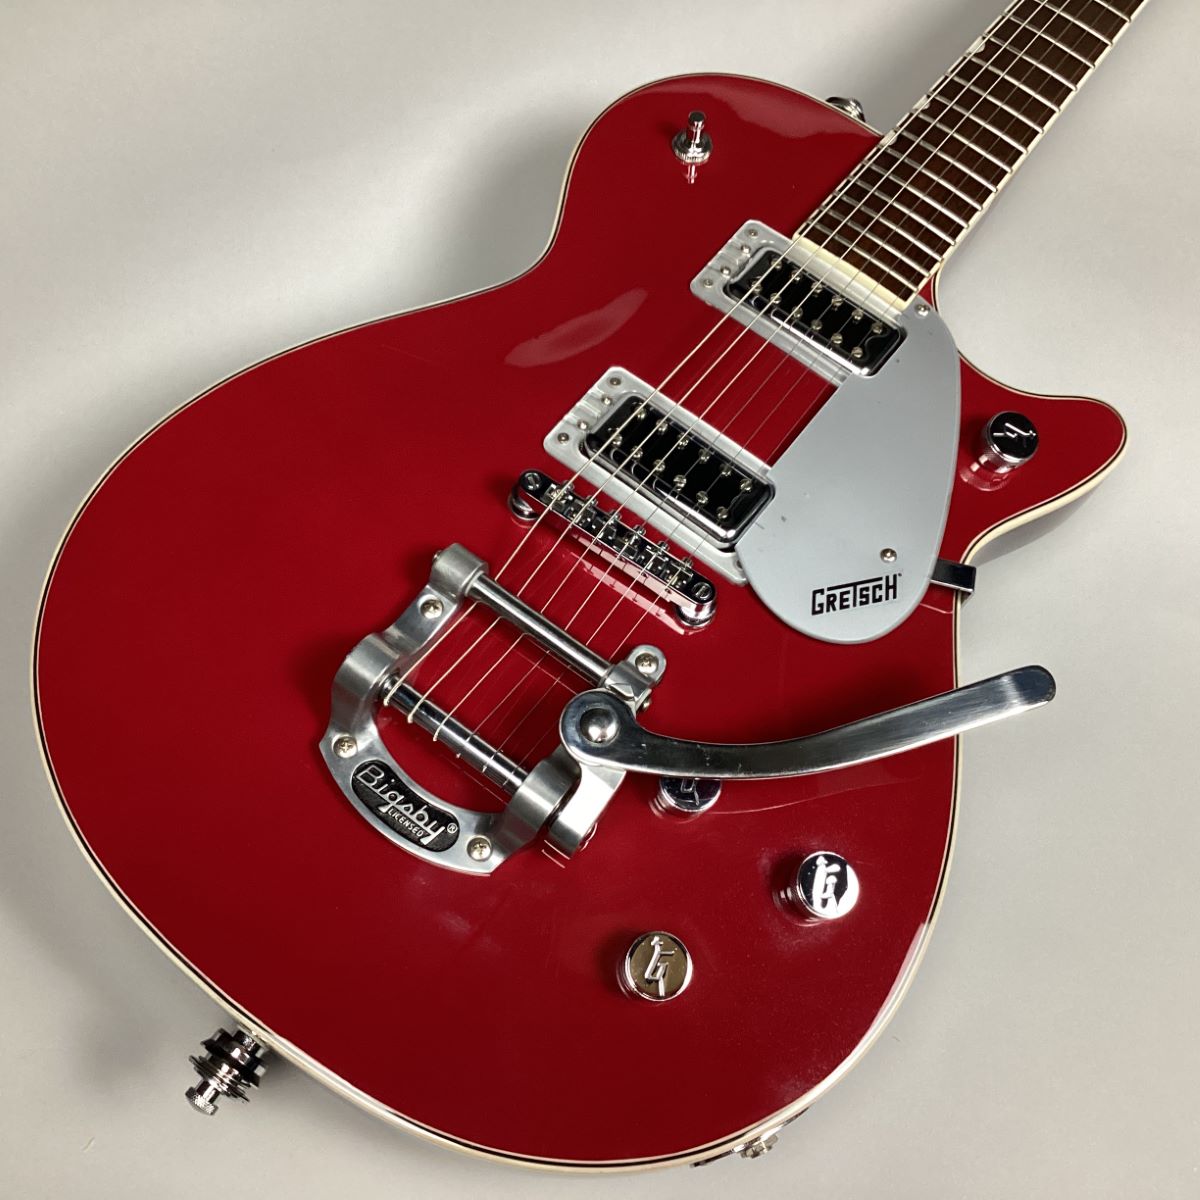 Bigsby　Firebird　Outlet]　エレキギター　Jet　with　グレッチ　Single-Cut　Electromatic　FT　G5230T　Gretsch　Red-